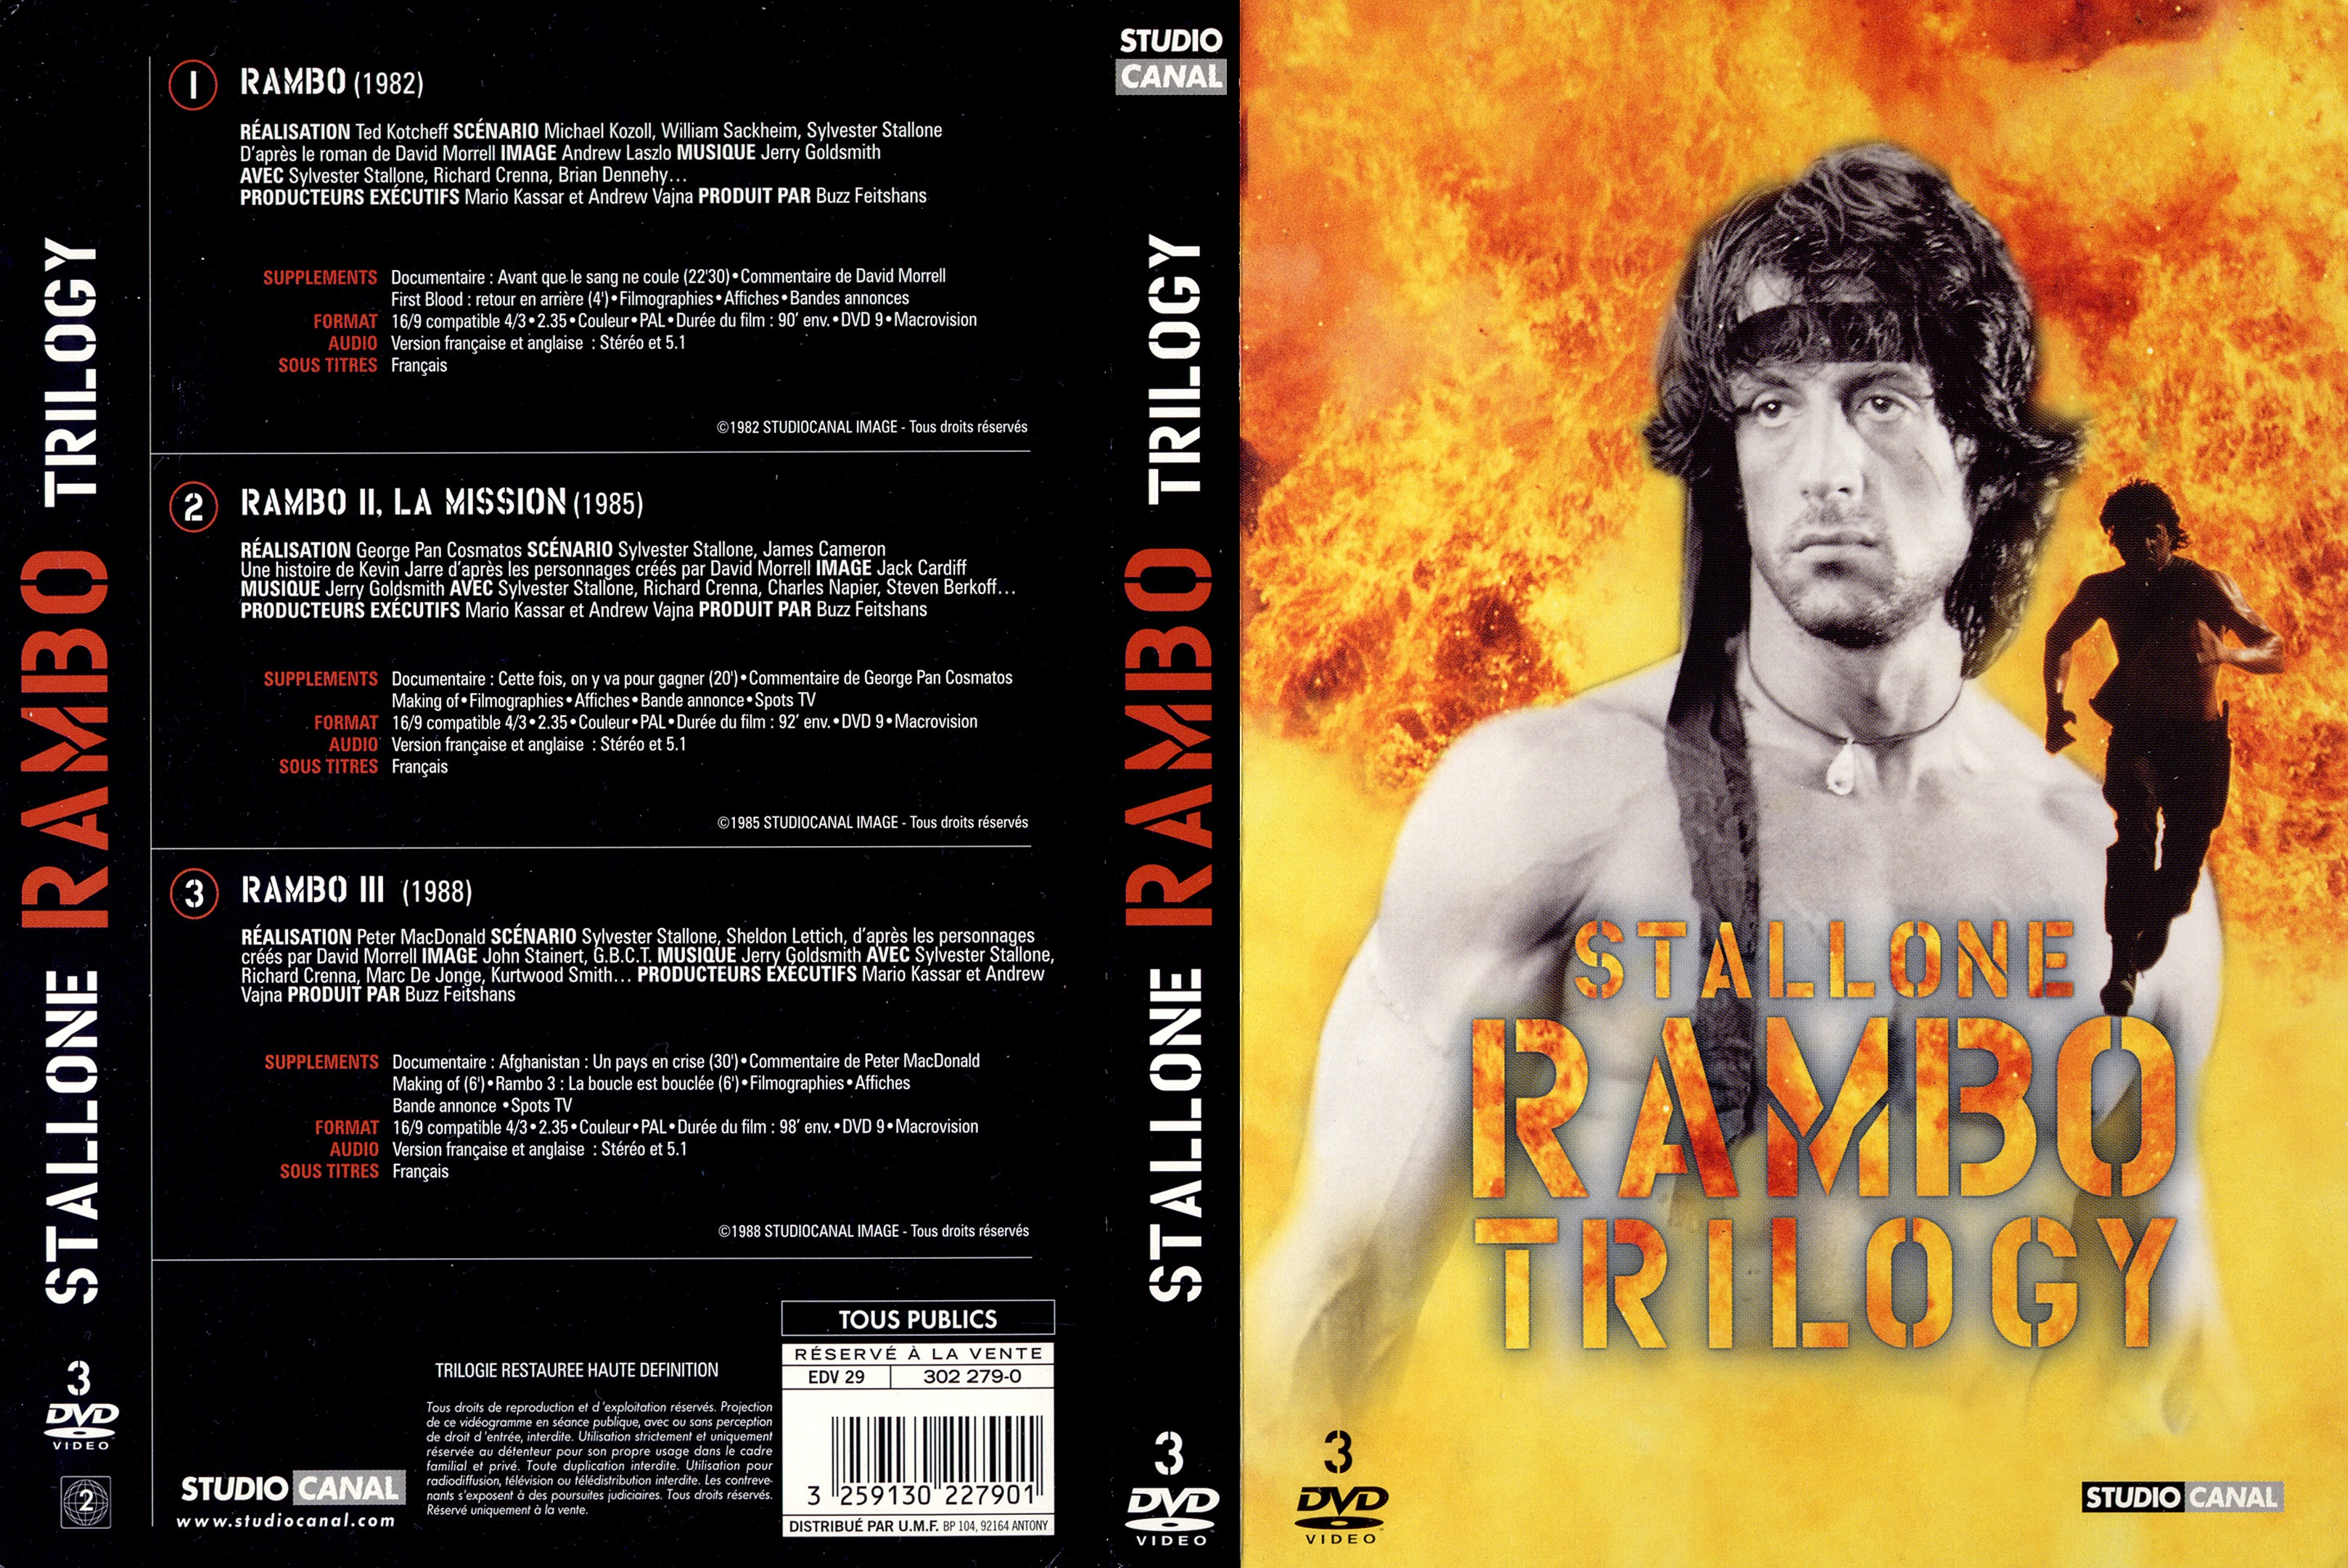 Jaquette DVD Rambo Trilogy